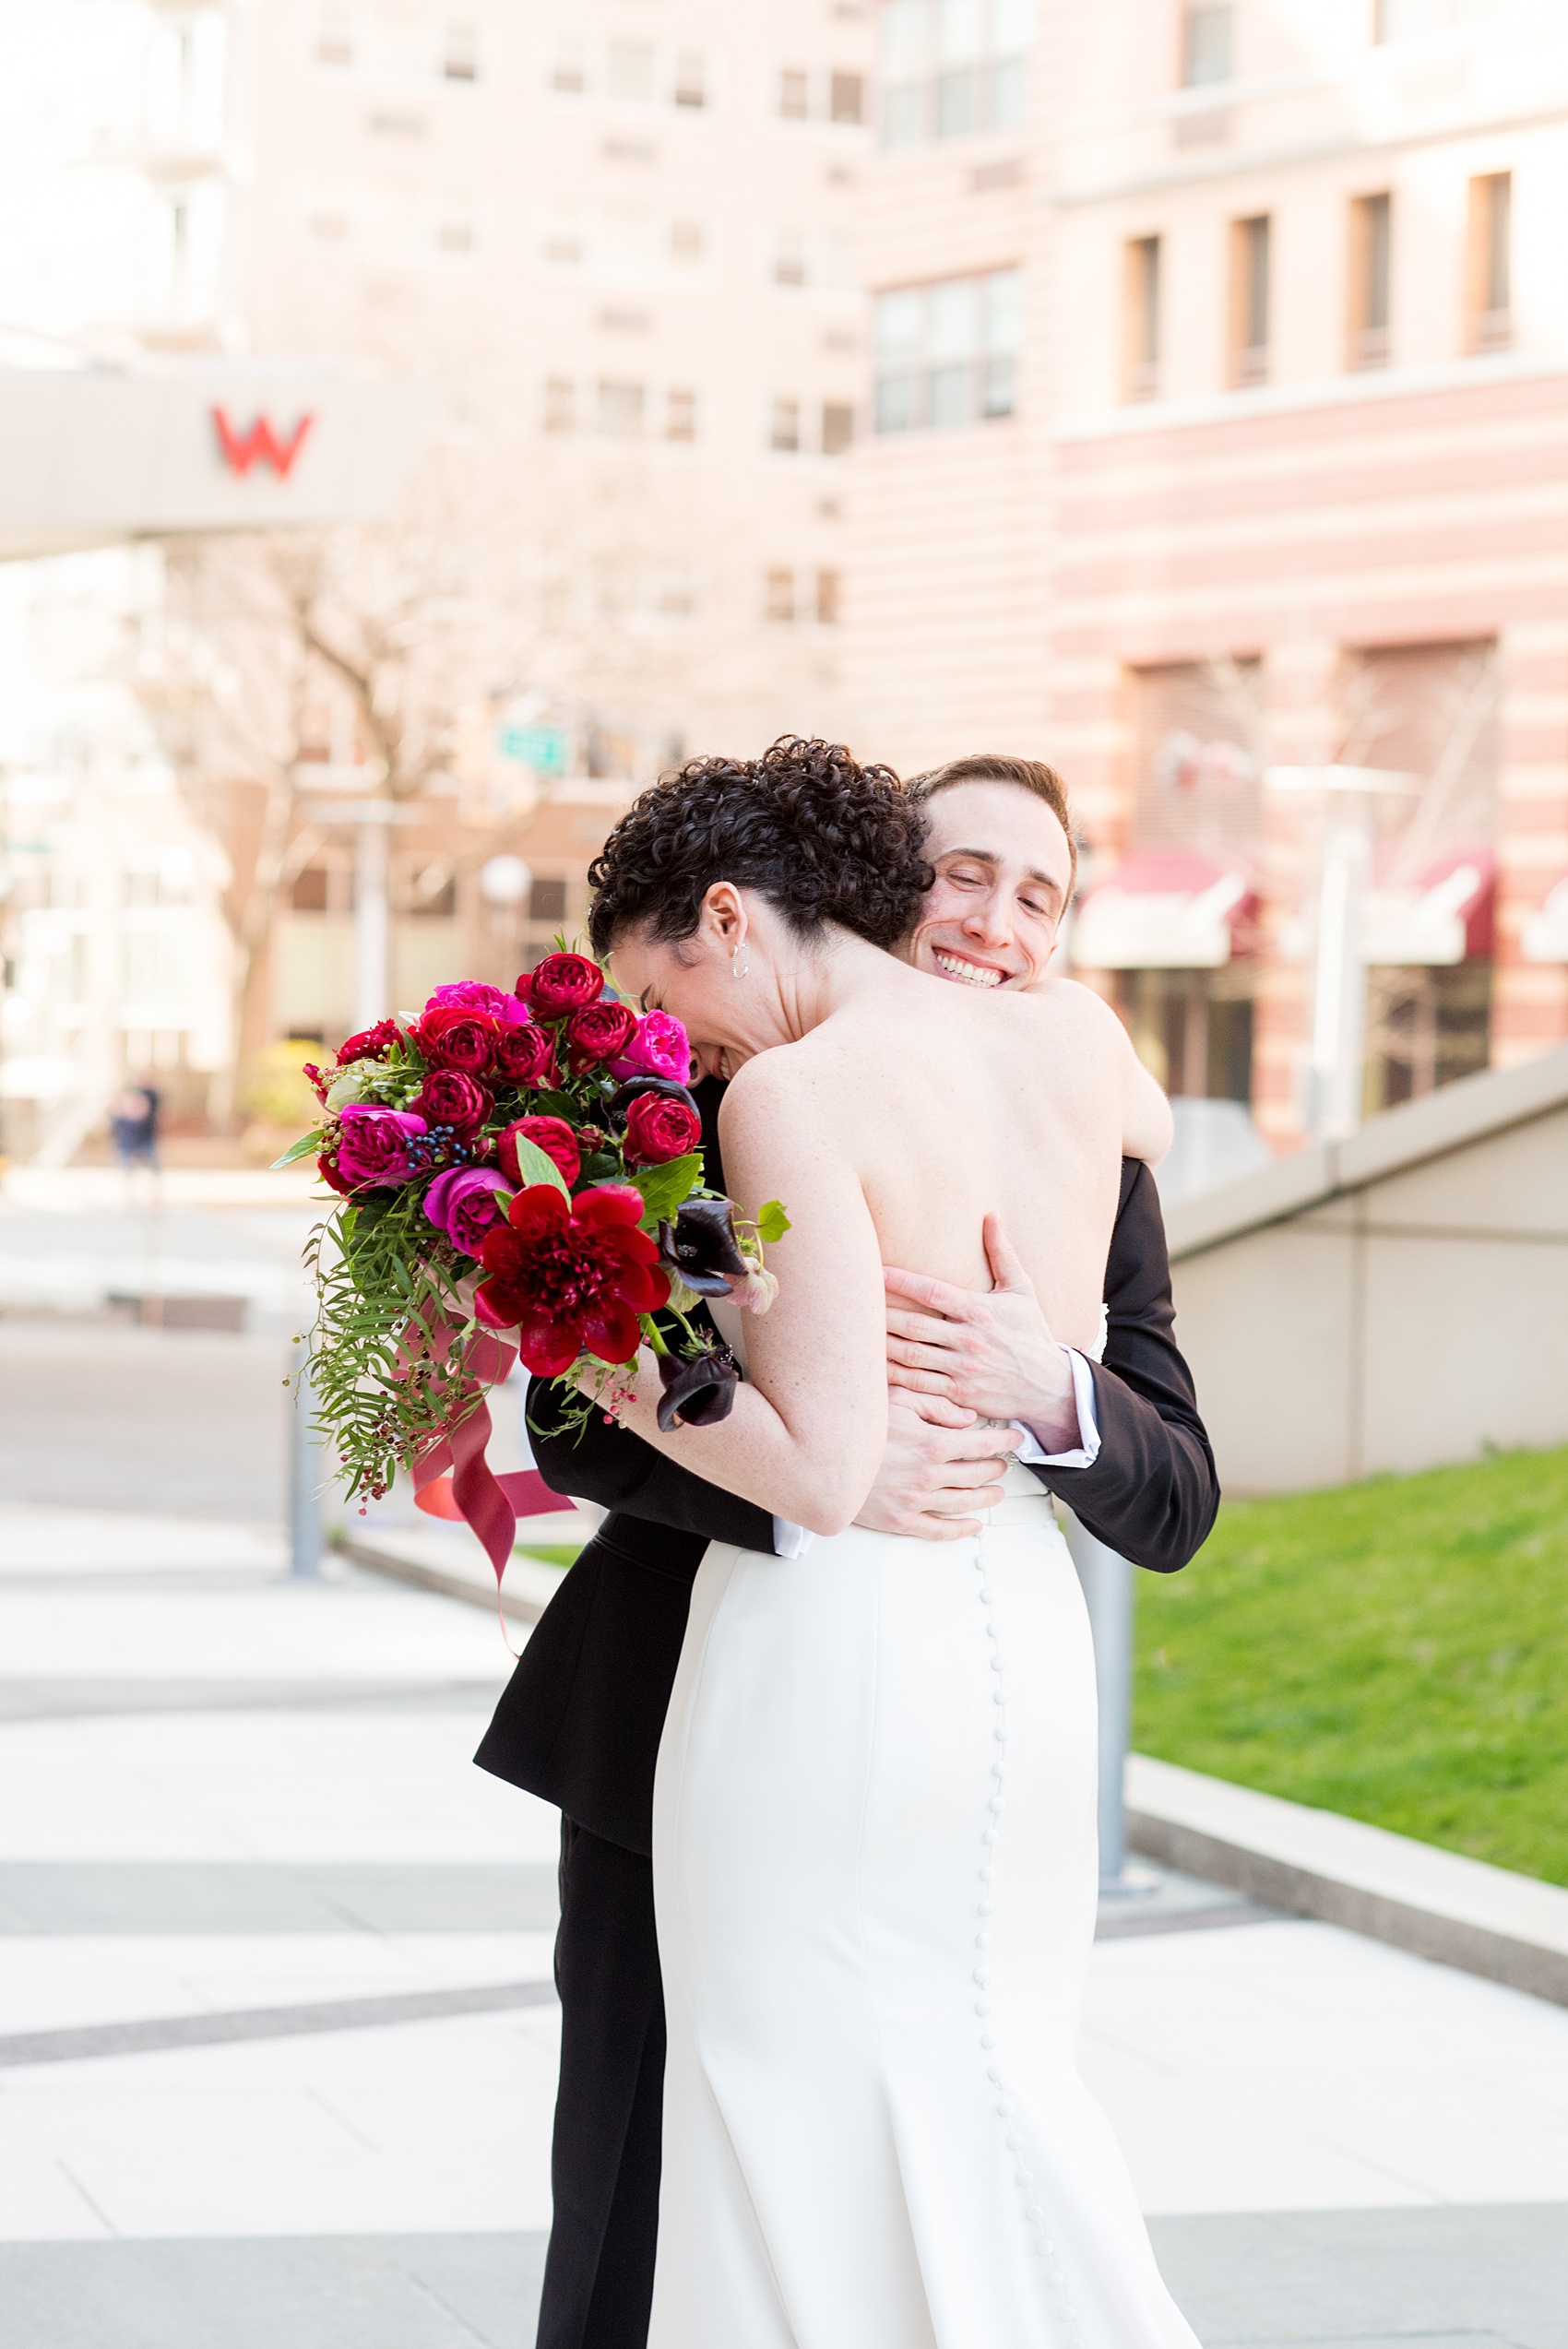 W Hoboken wedding photos by Mikkel Paige Photography at this NJ venue. Pictures in this well known New Jersey city with a view of the NYC skyline. The bride and the groom wore romantic colors including burgundy, fuchsia, red and classic black. Flowers by Sachi Rose Design. #mikkelpaige #HobokenWedding #NewJerseyPhotographer #NewYorkCityPhotographer #NYCweddingphotographer #brideandgroomphotos #redpeonies #romanticwedding #springwedding #CityWedding